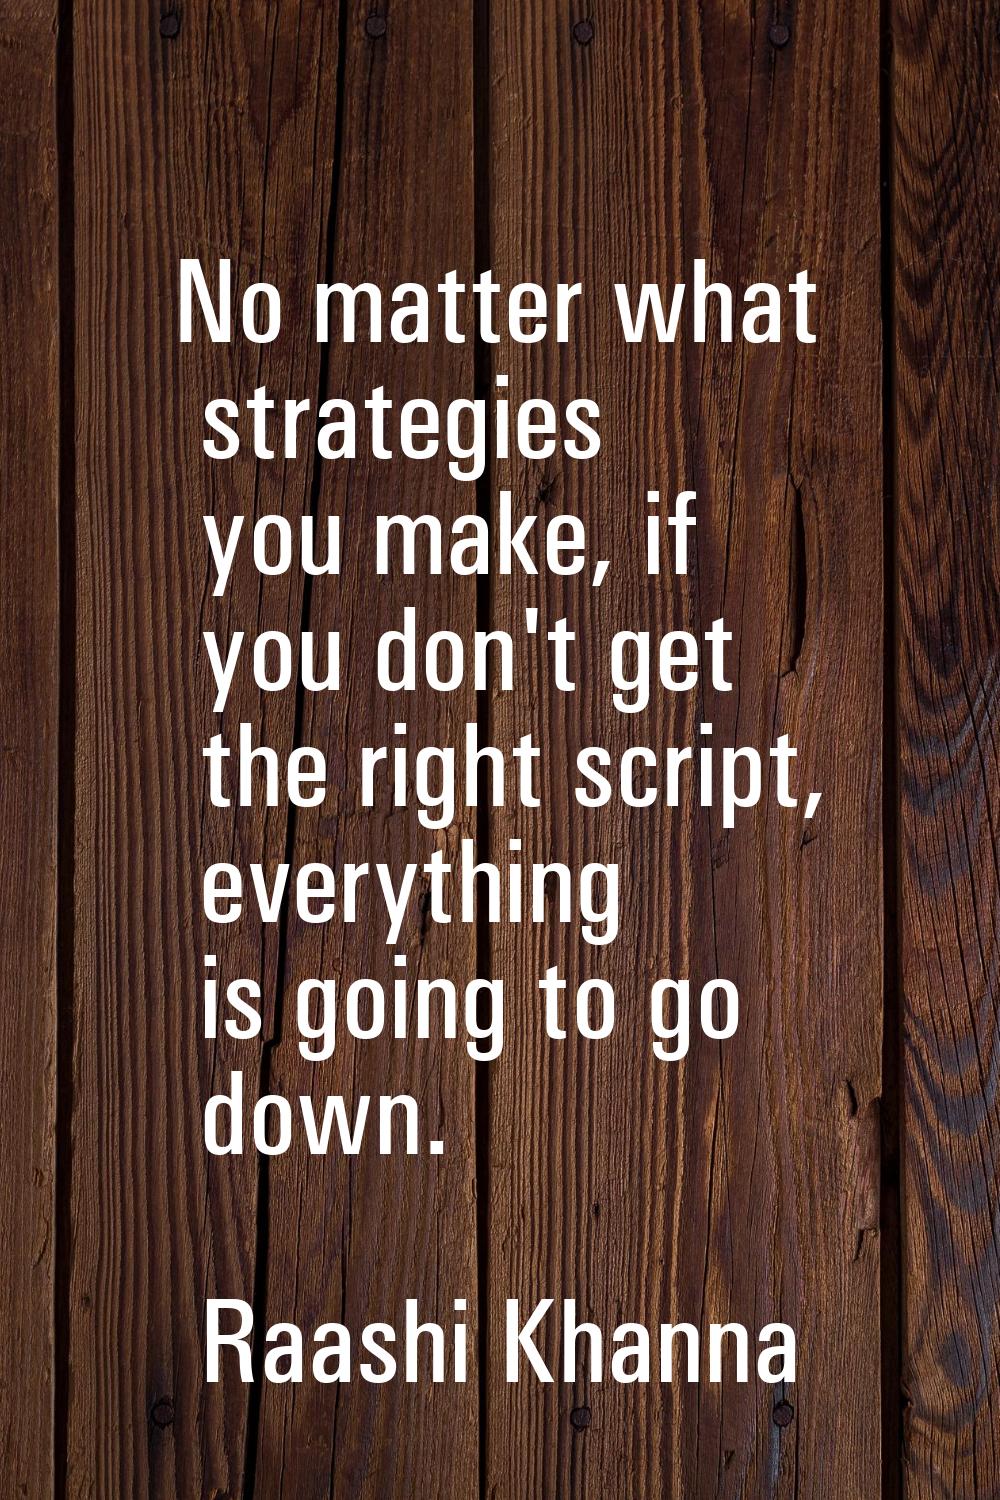 No matter what strategies you make, if you don't get the right script, everything is going to go do